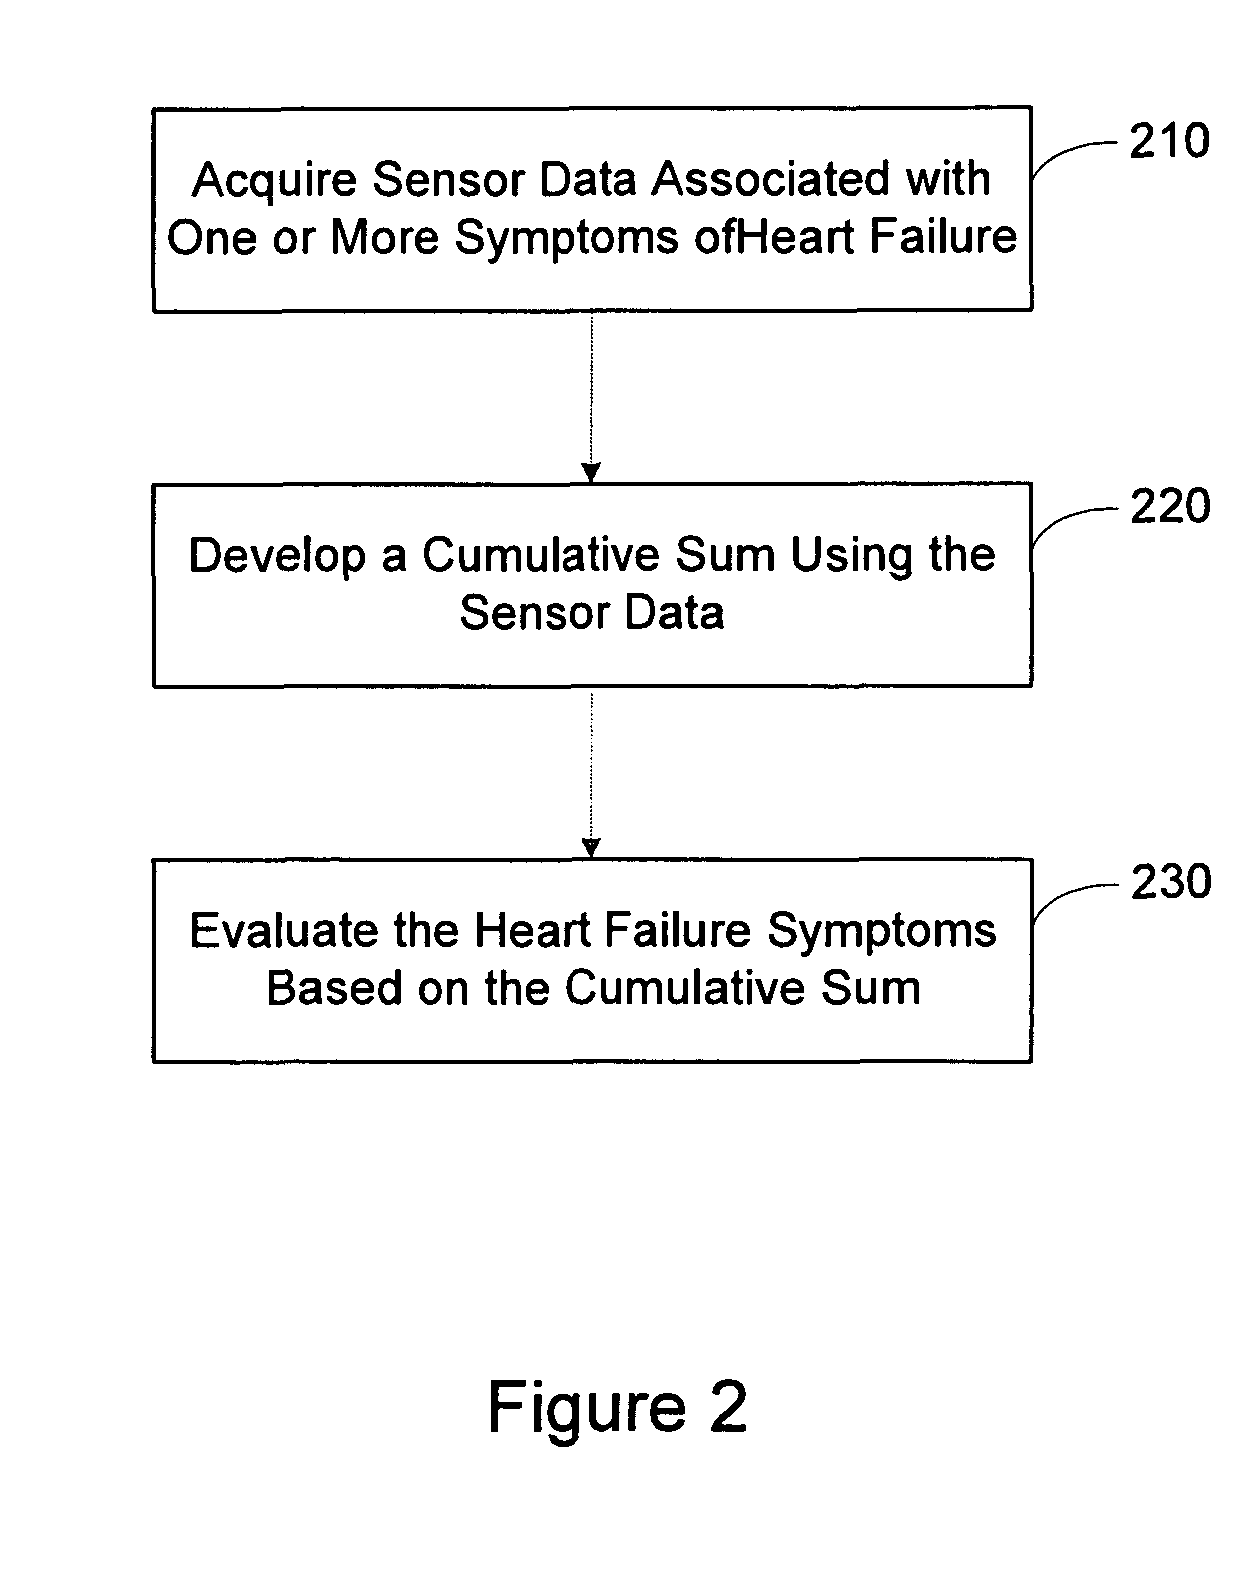 Detection of heart failure decompensation based on cumulative changes in sensor signals